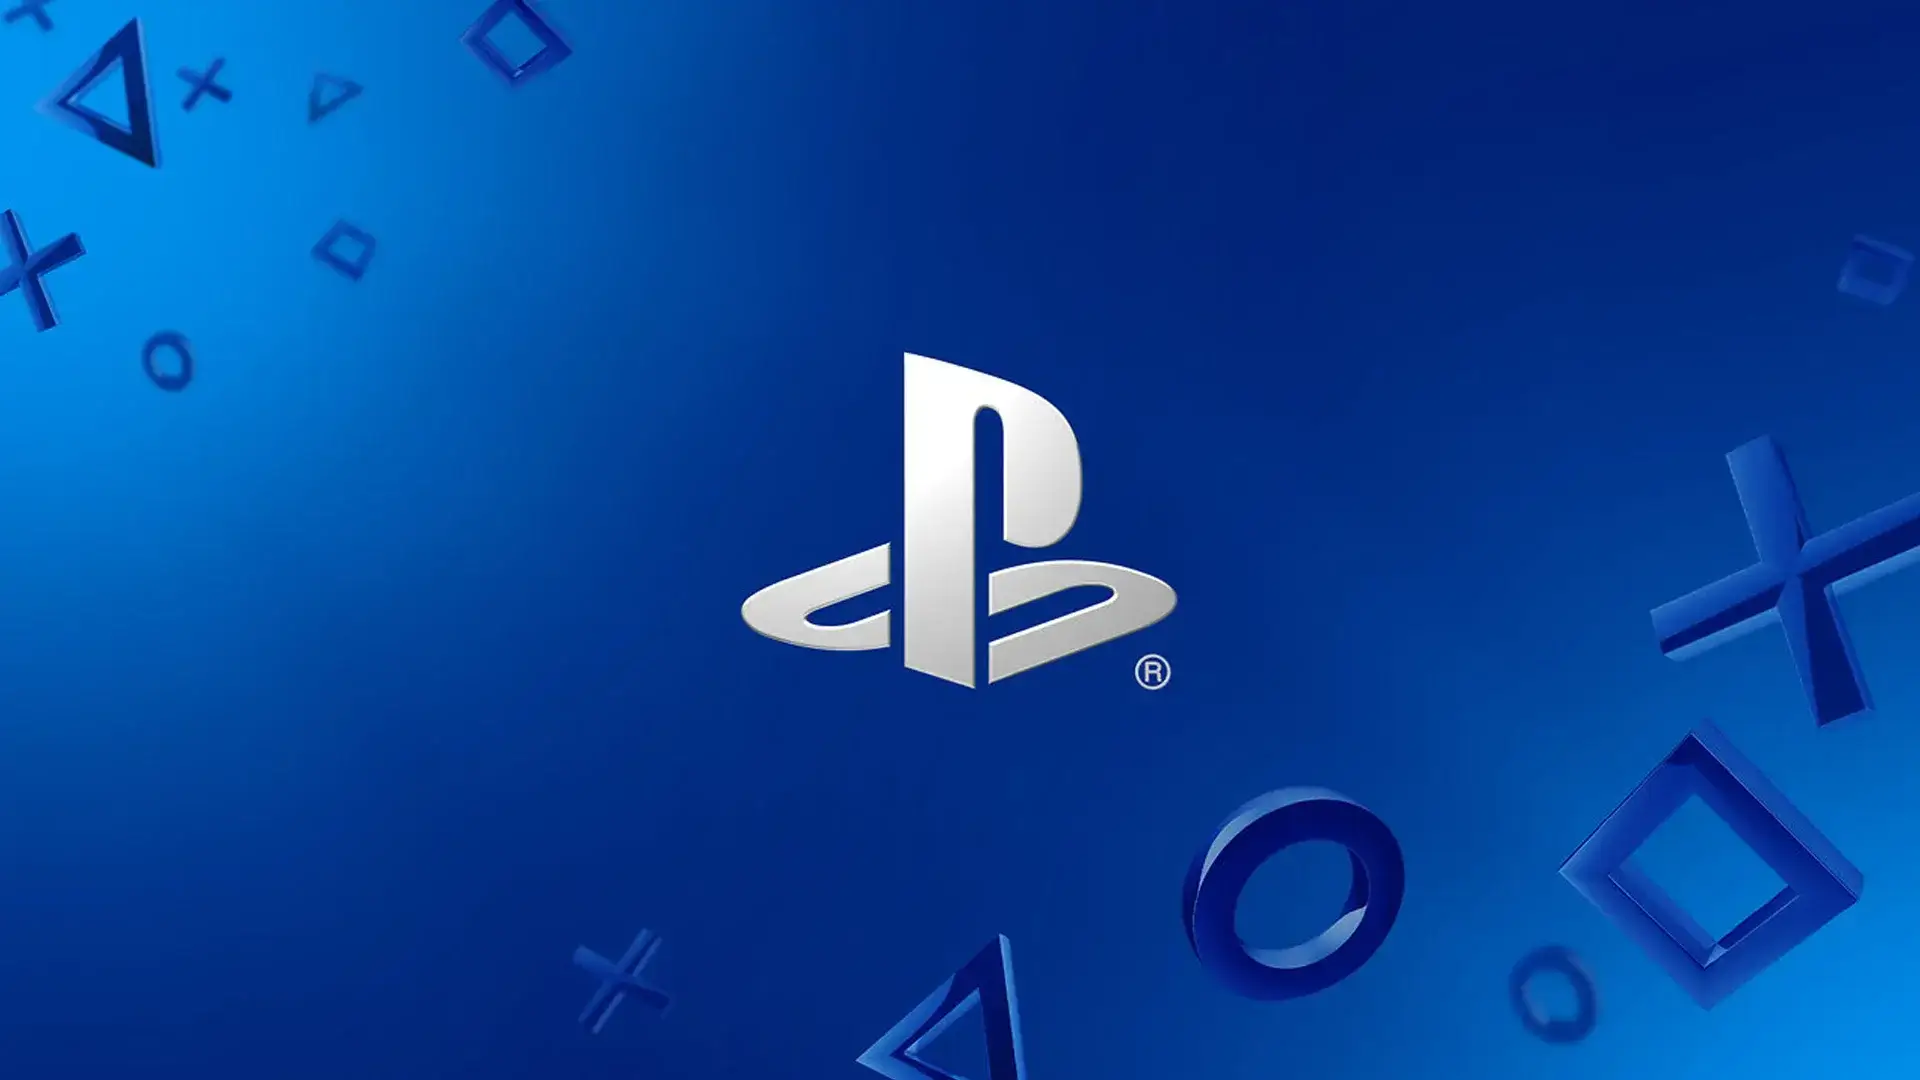 Top 10 PlayStation Games to Buy with PSN Gift Cards